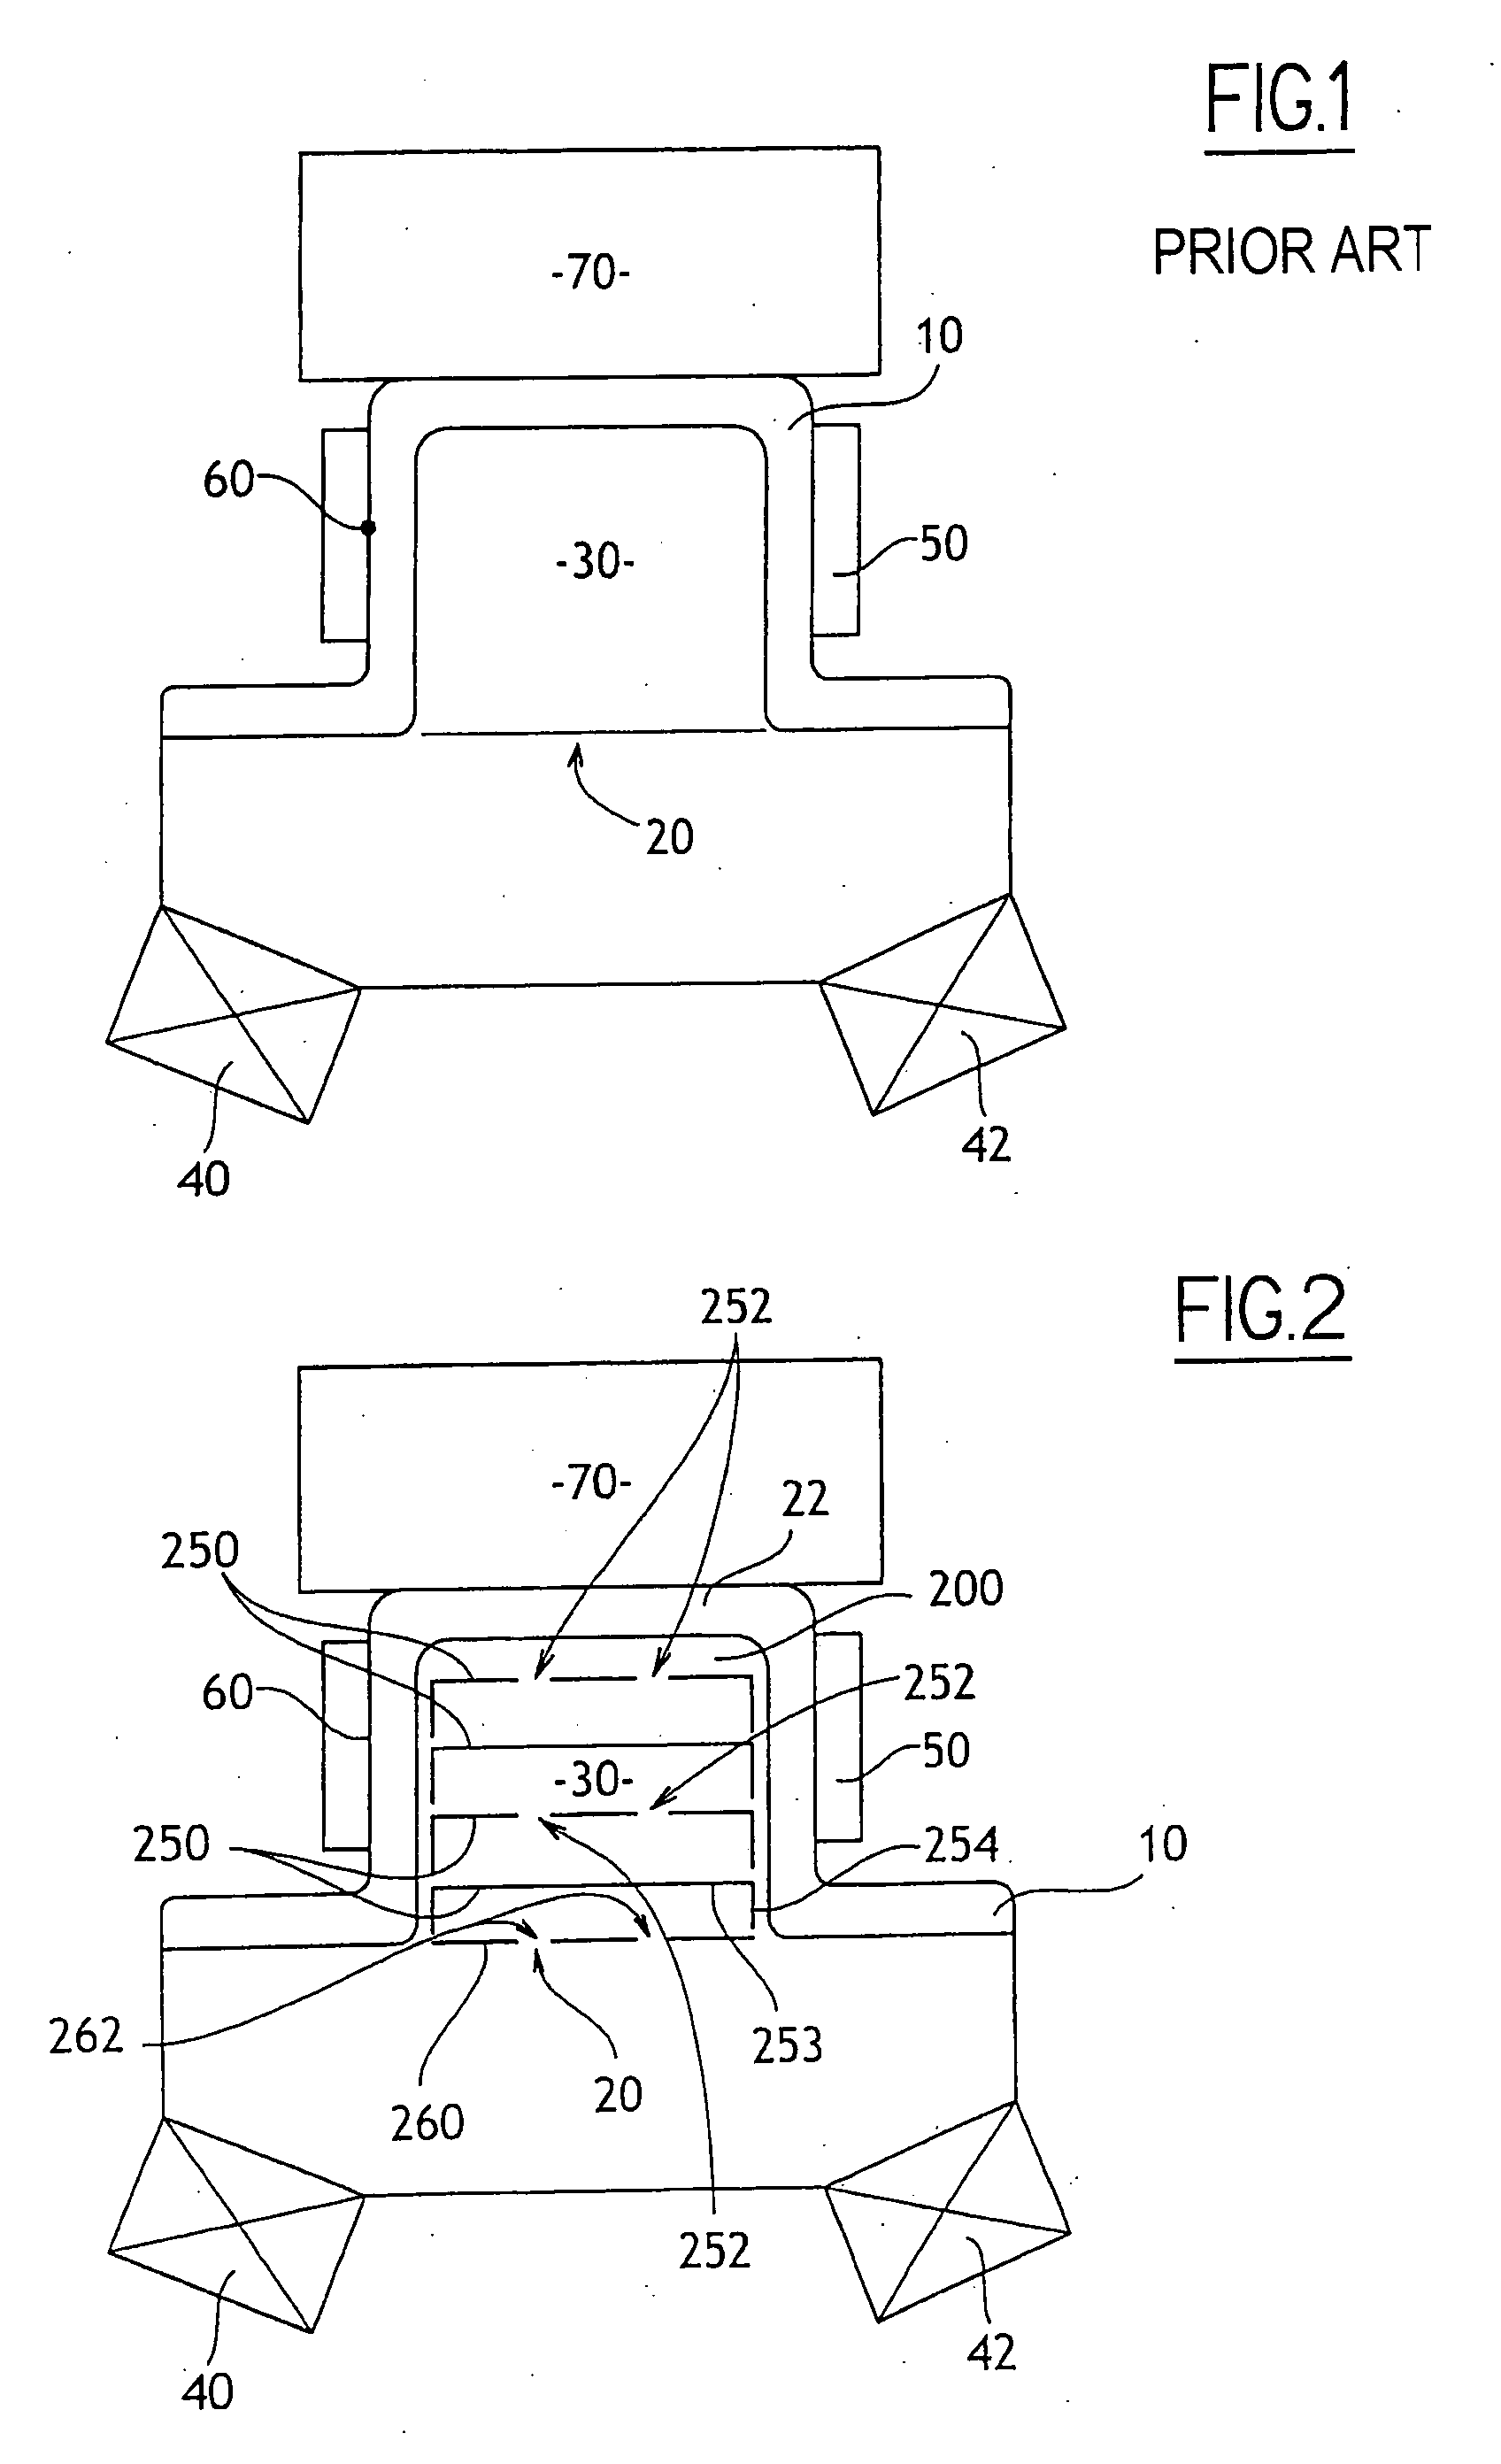 Thermally-controlled actuator device